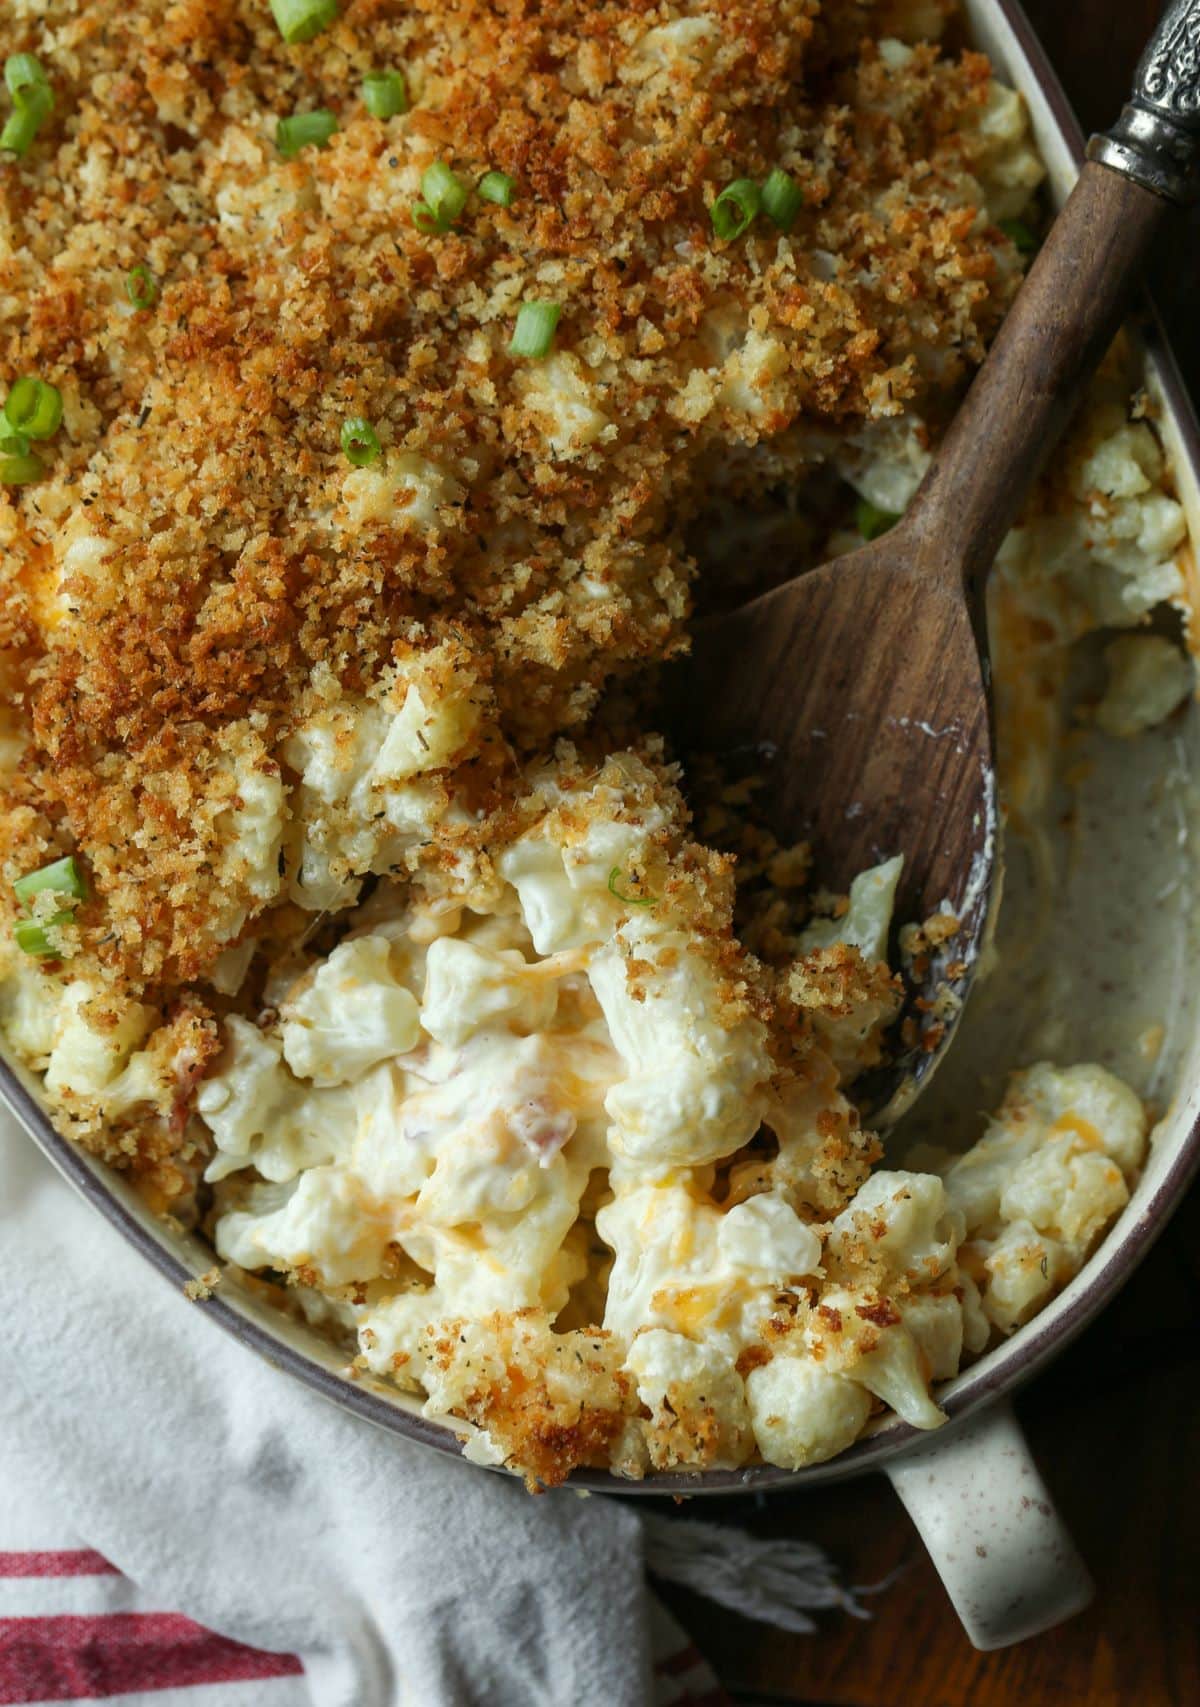 A cheesy cauliflower casserole with portions scooped out, and a wooden spoon resting in the dish.